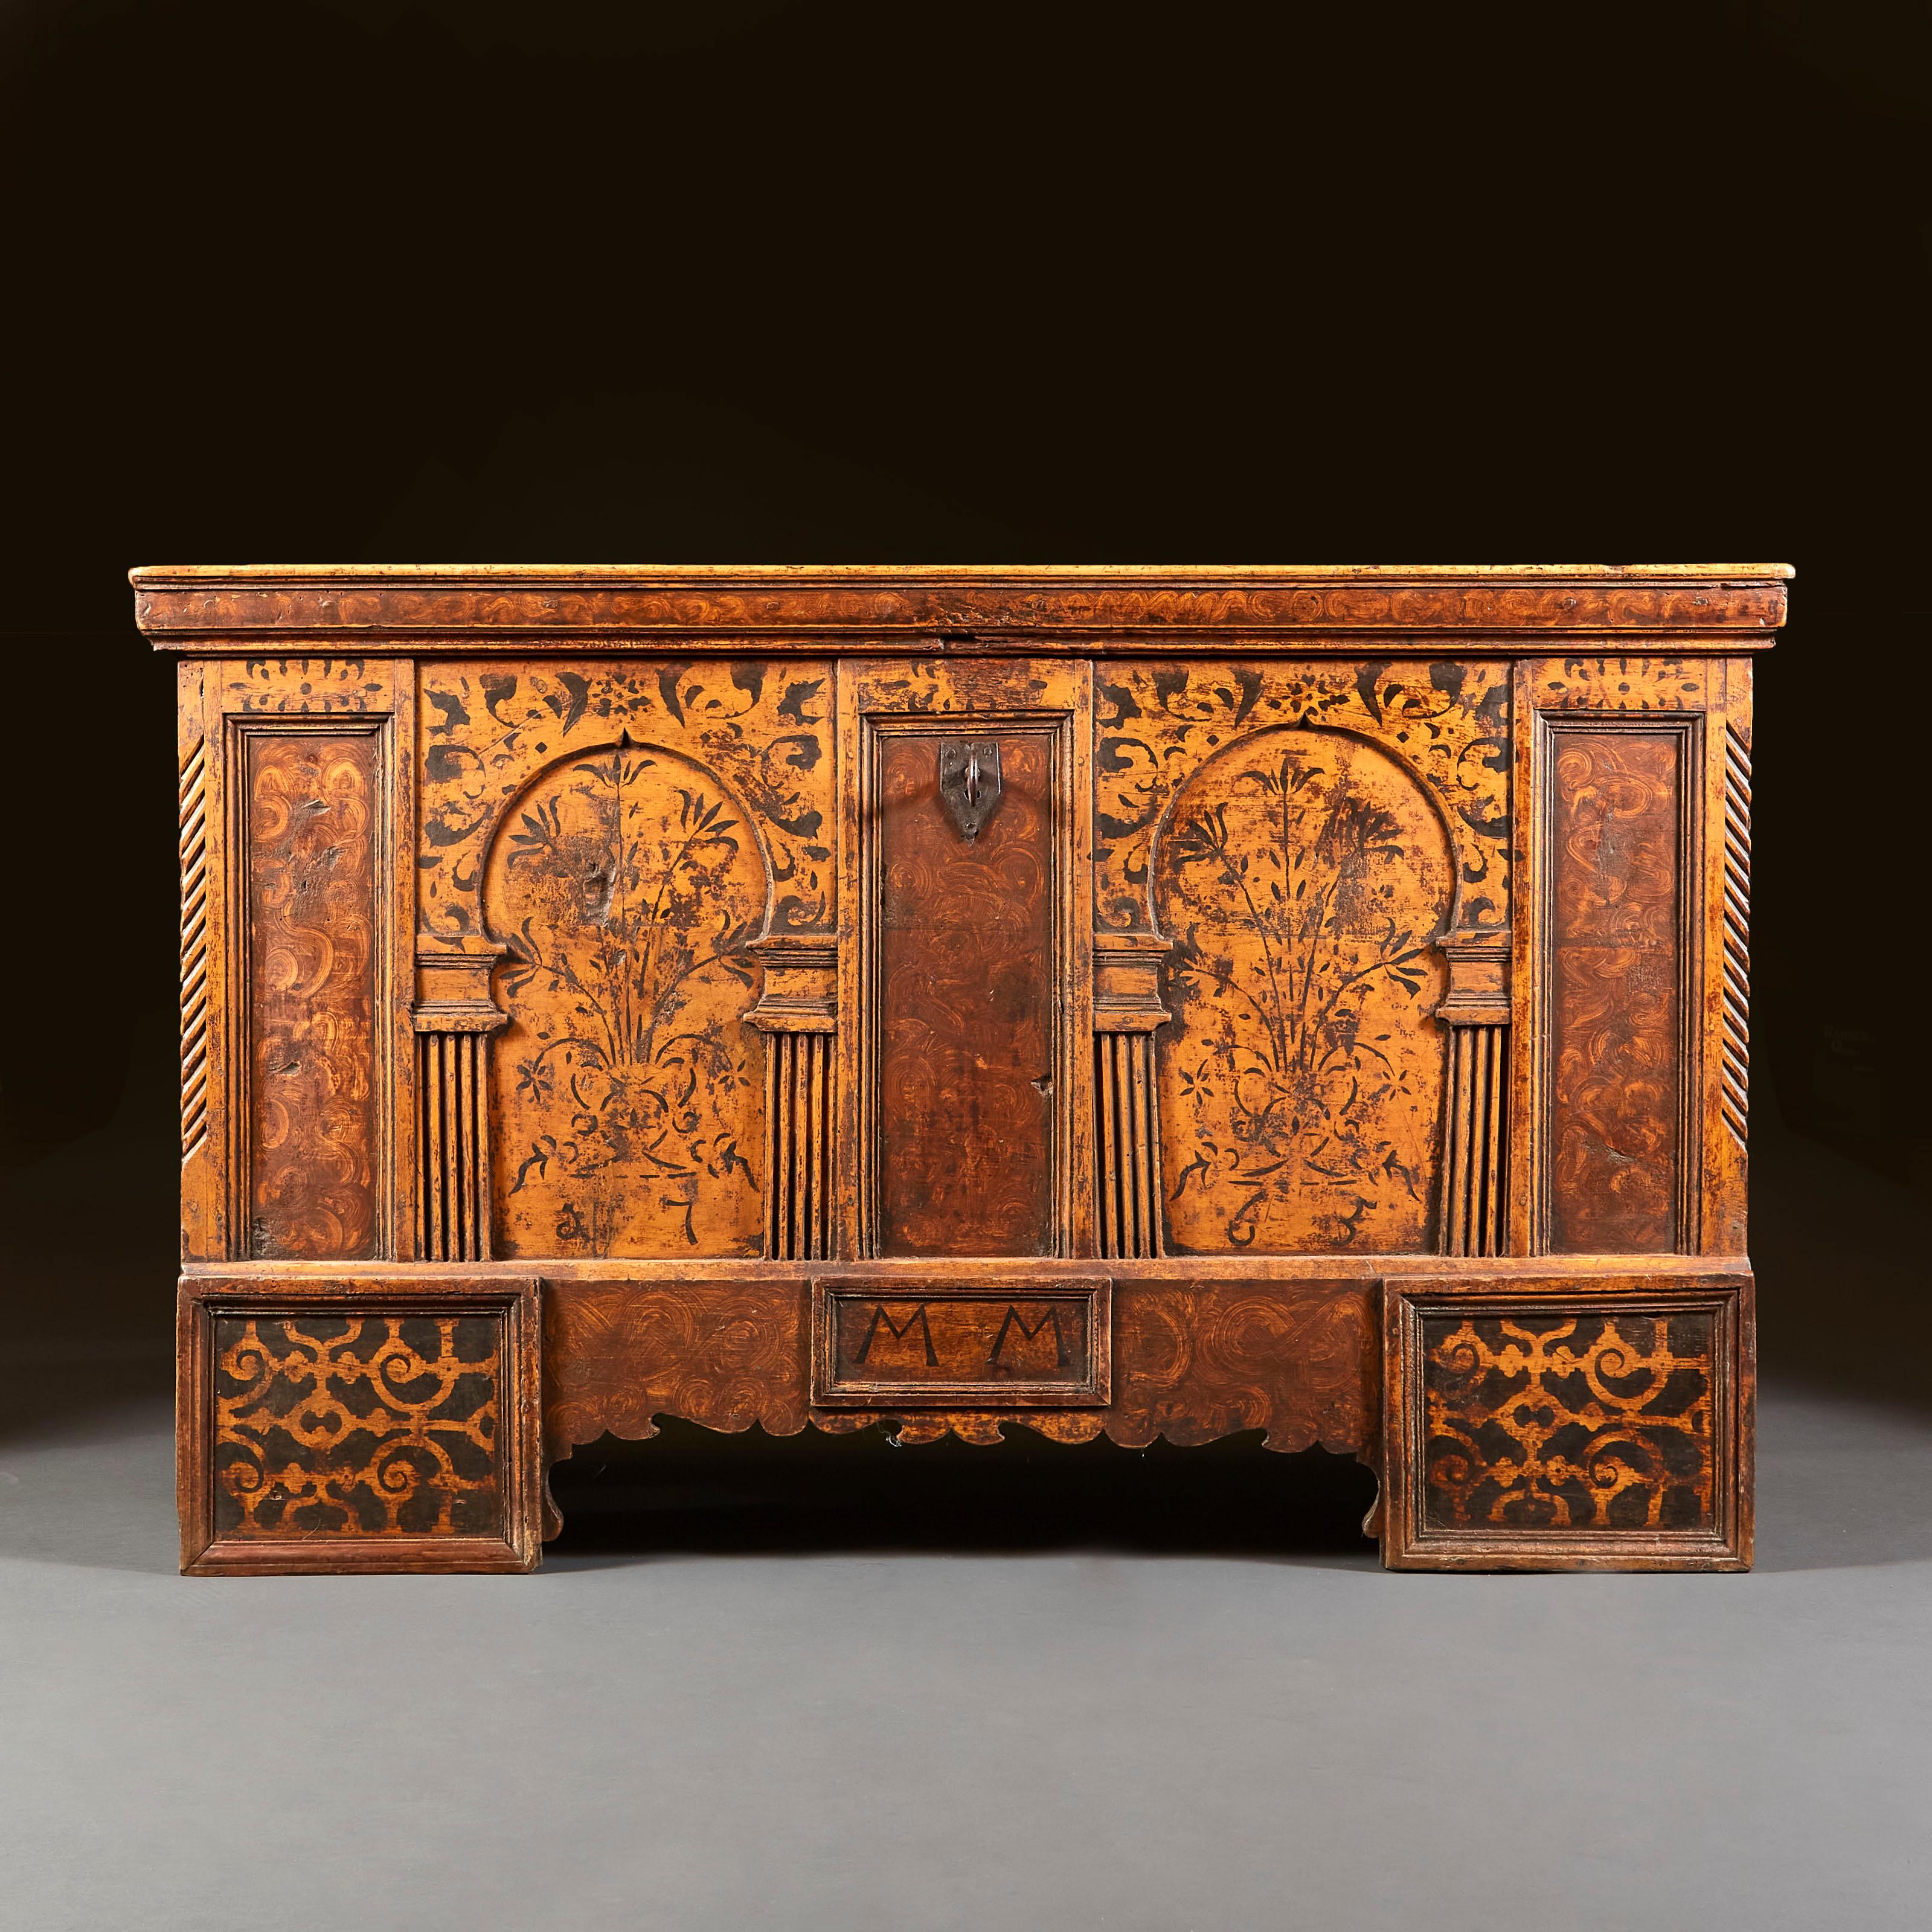 A rare mid eighteenth century Italian marriage coffer, decorated with two architectural arches to the front, filled with sprays of flowers and surrounded by painted scrolling motives, the feet and sides also with painted scrolling decoration. The